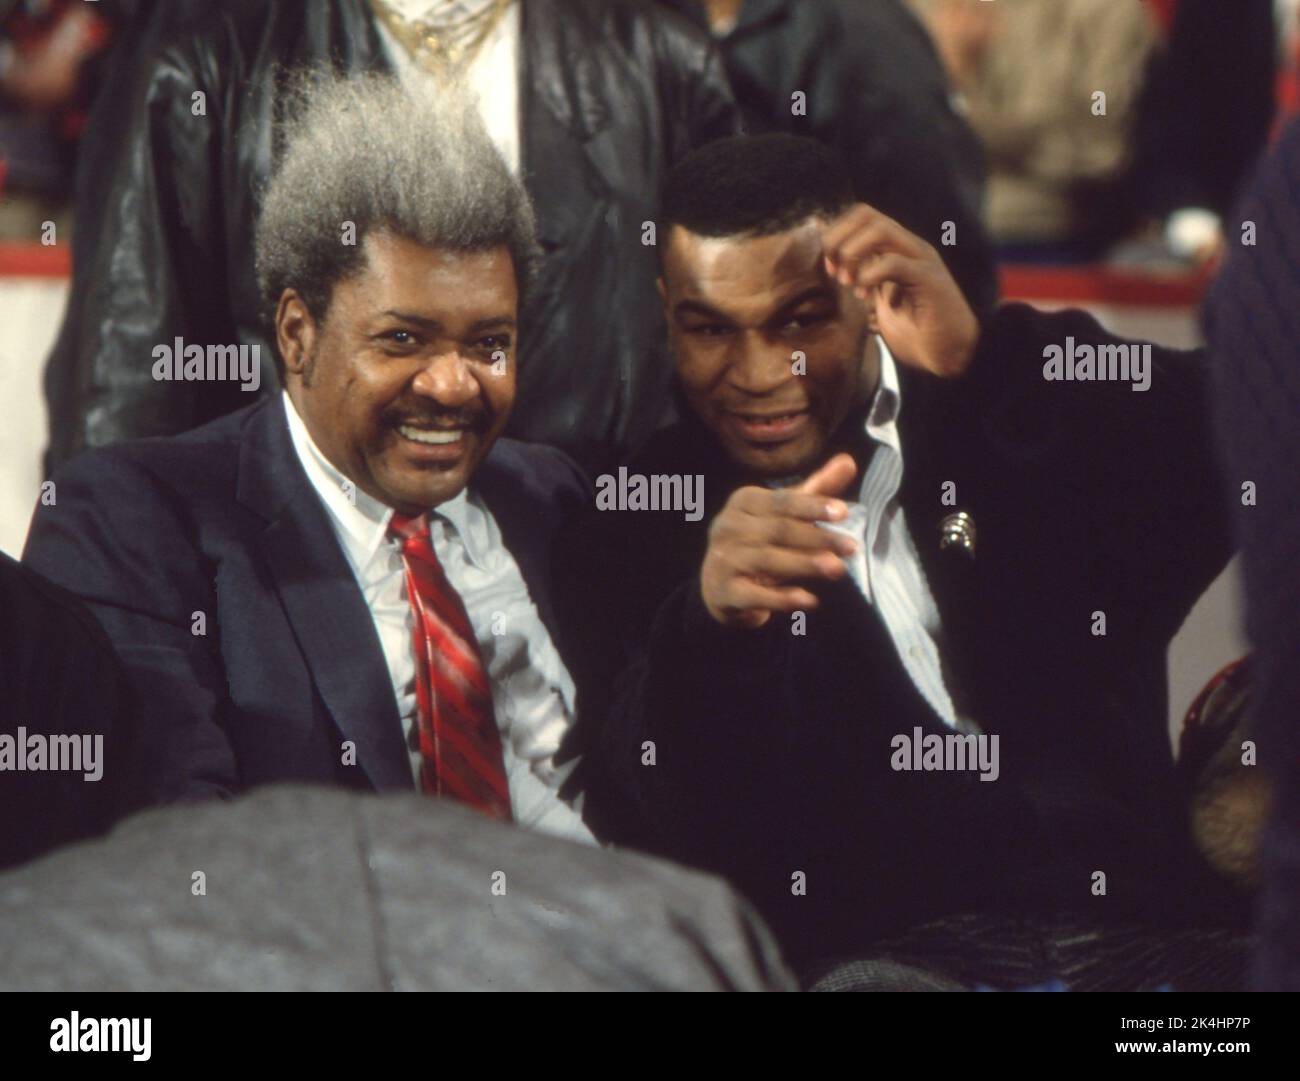 Boxing promoter Don King and heavyweight boxing champion Mike Tyson gesture to photographers while attending a Chicago Bulls basketball game, ca. 1990 Stock Photo